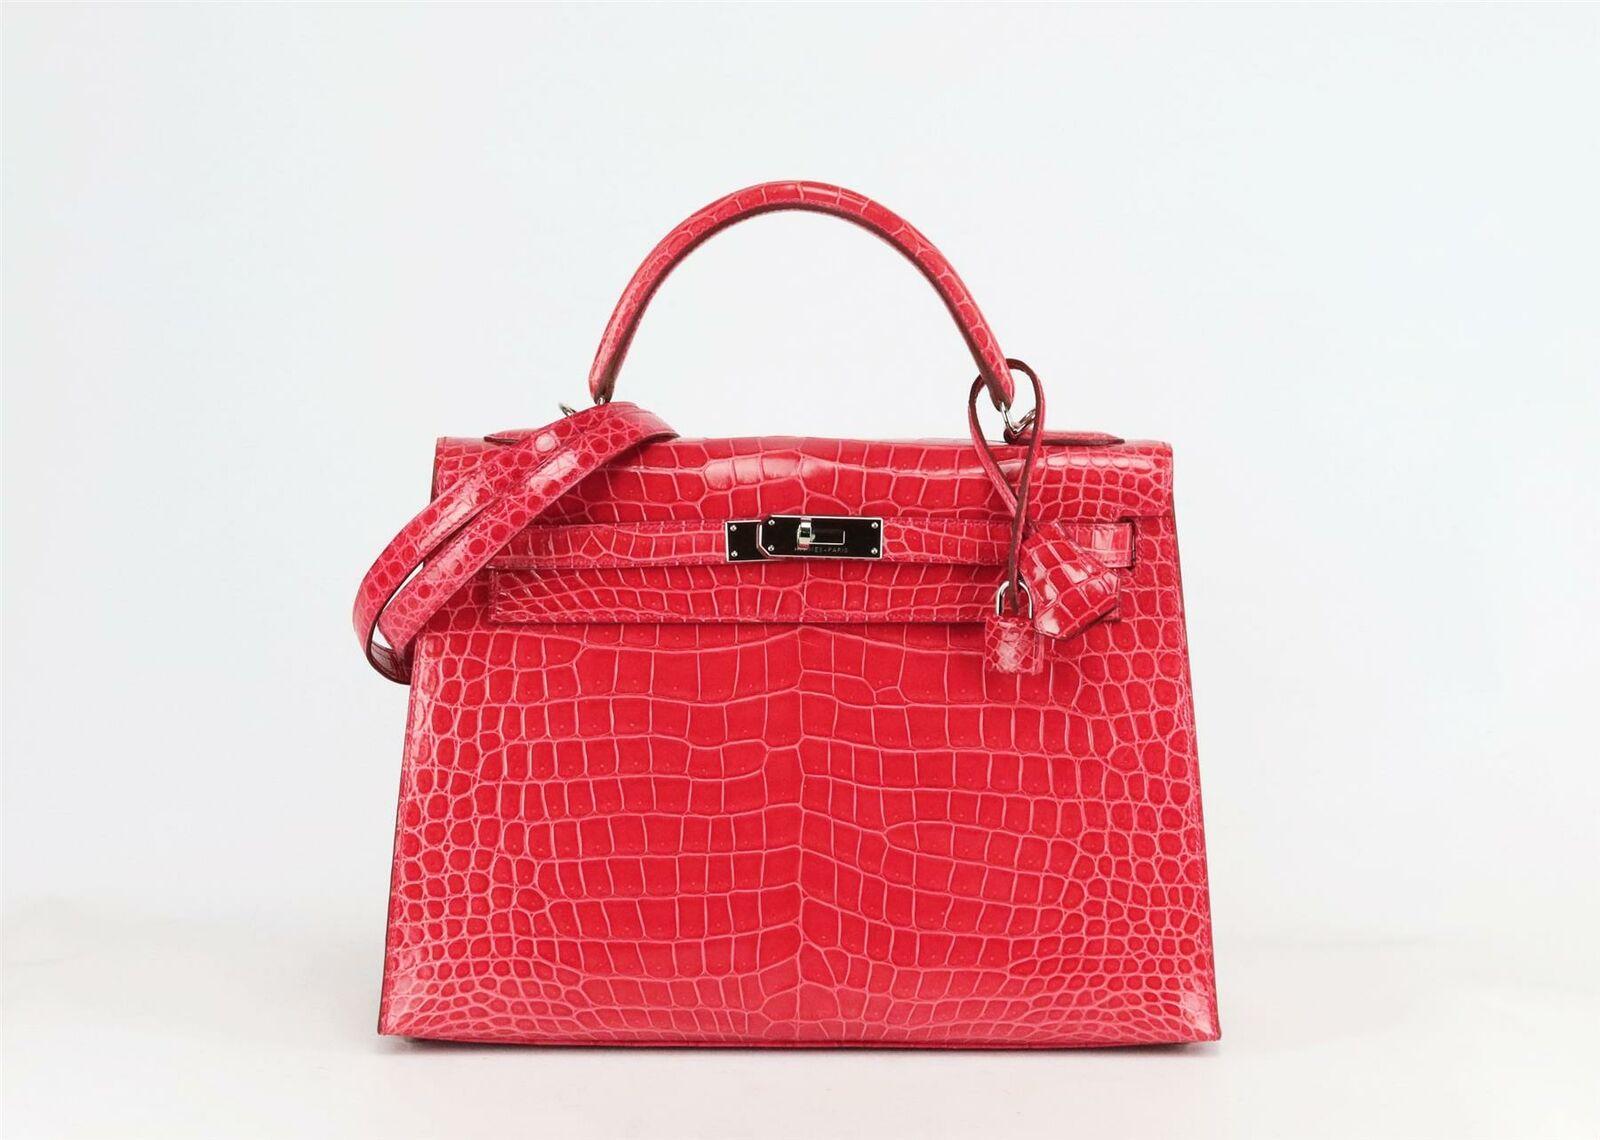 Made in France, this beautiful 2015 Hermès ‘Kelly Sellier’ 32cm handbag has been made from shiny Porosus Crocodile exterior in coral and matching leather interior, this piece is decorated with palladium hardware on the front and finished with top